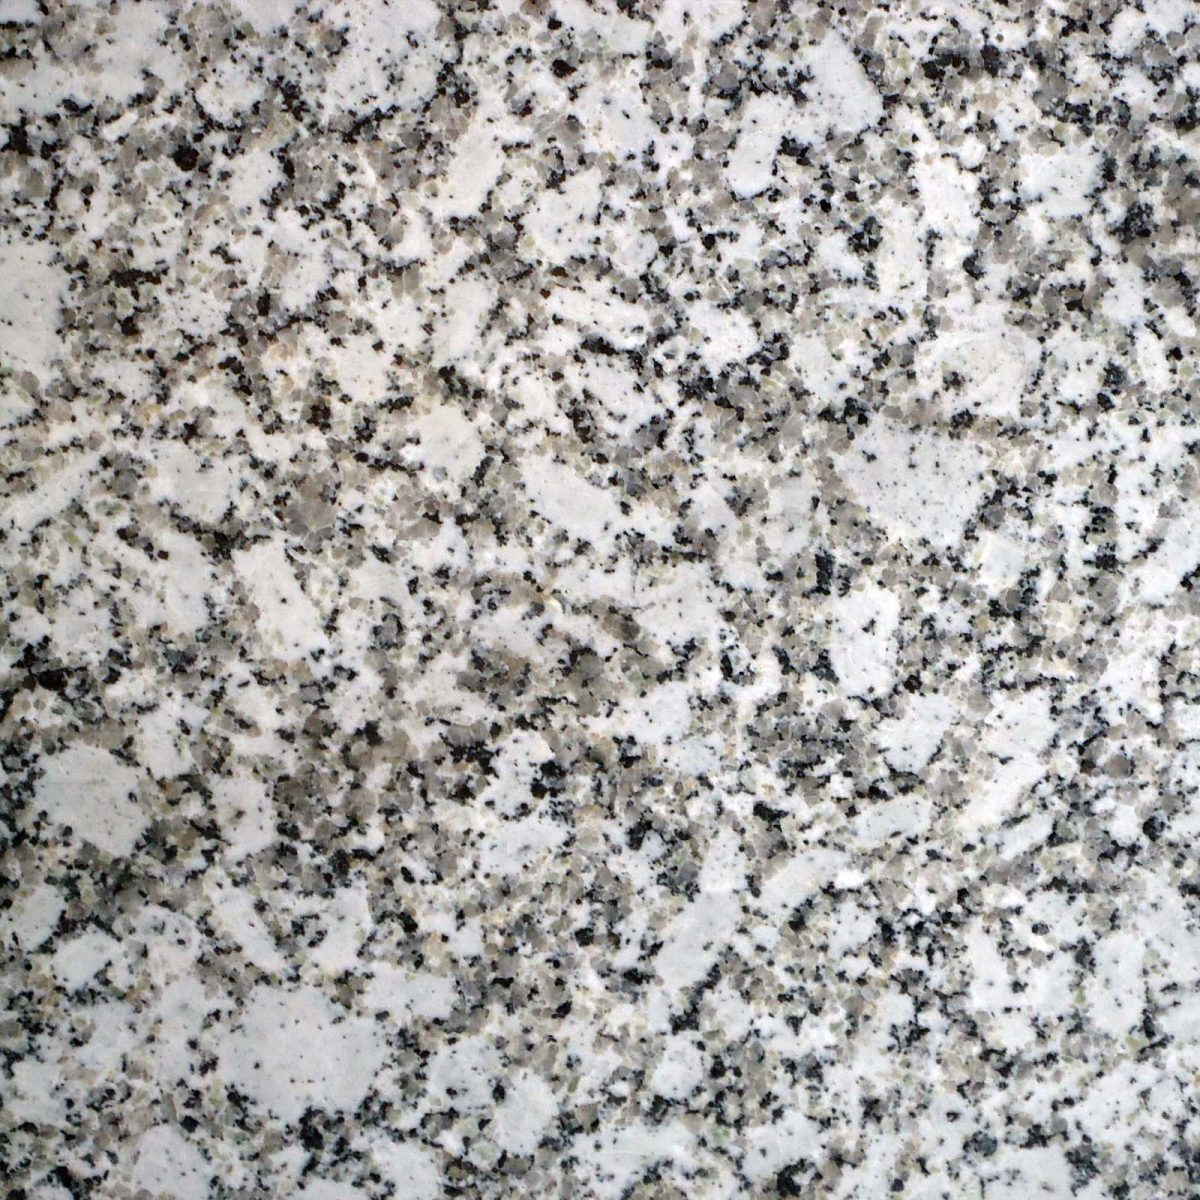 p-white-granite-exporter-supplier-manufacturer-from-india